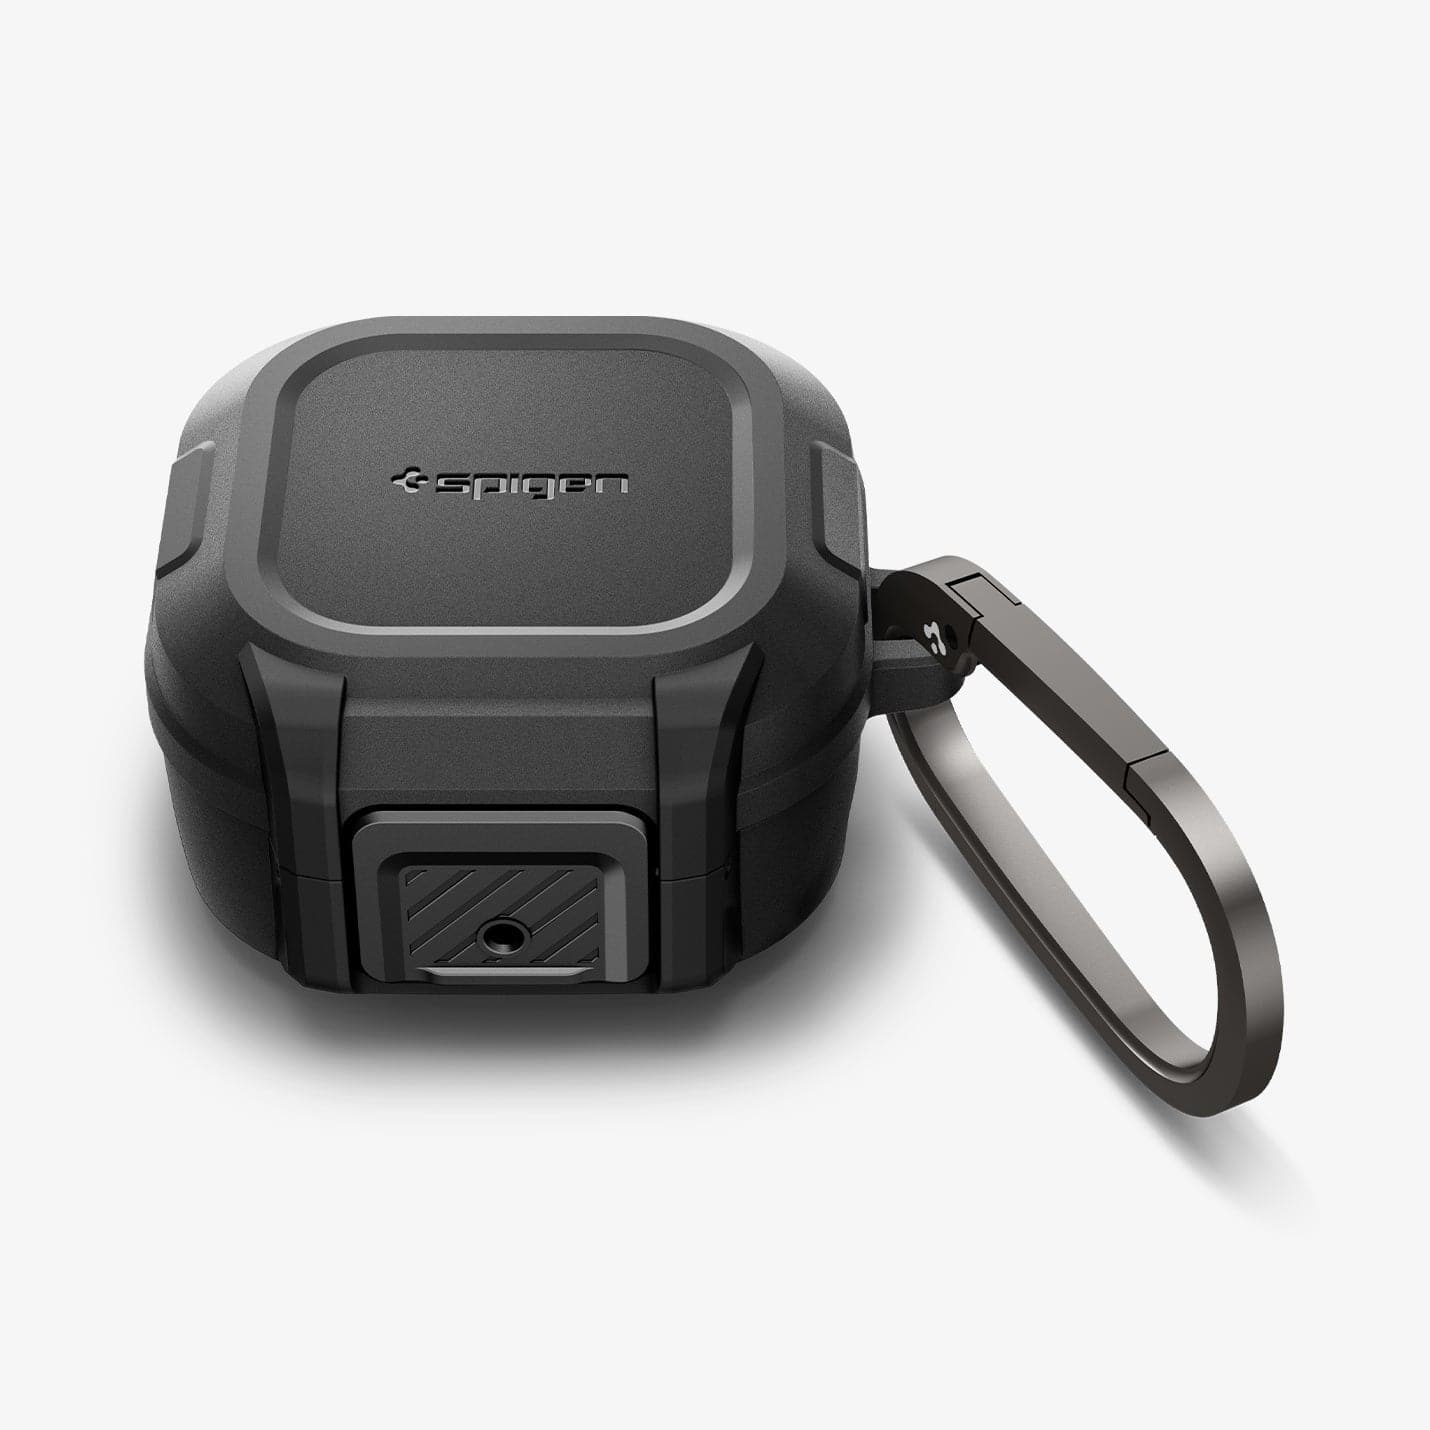 ACS05264 - Galaxy Buds 2 Pro / 2 / Pro / Live Case Lock Fit in matte black showing the front, top and carabiner